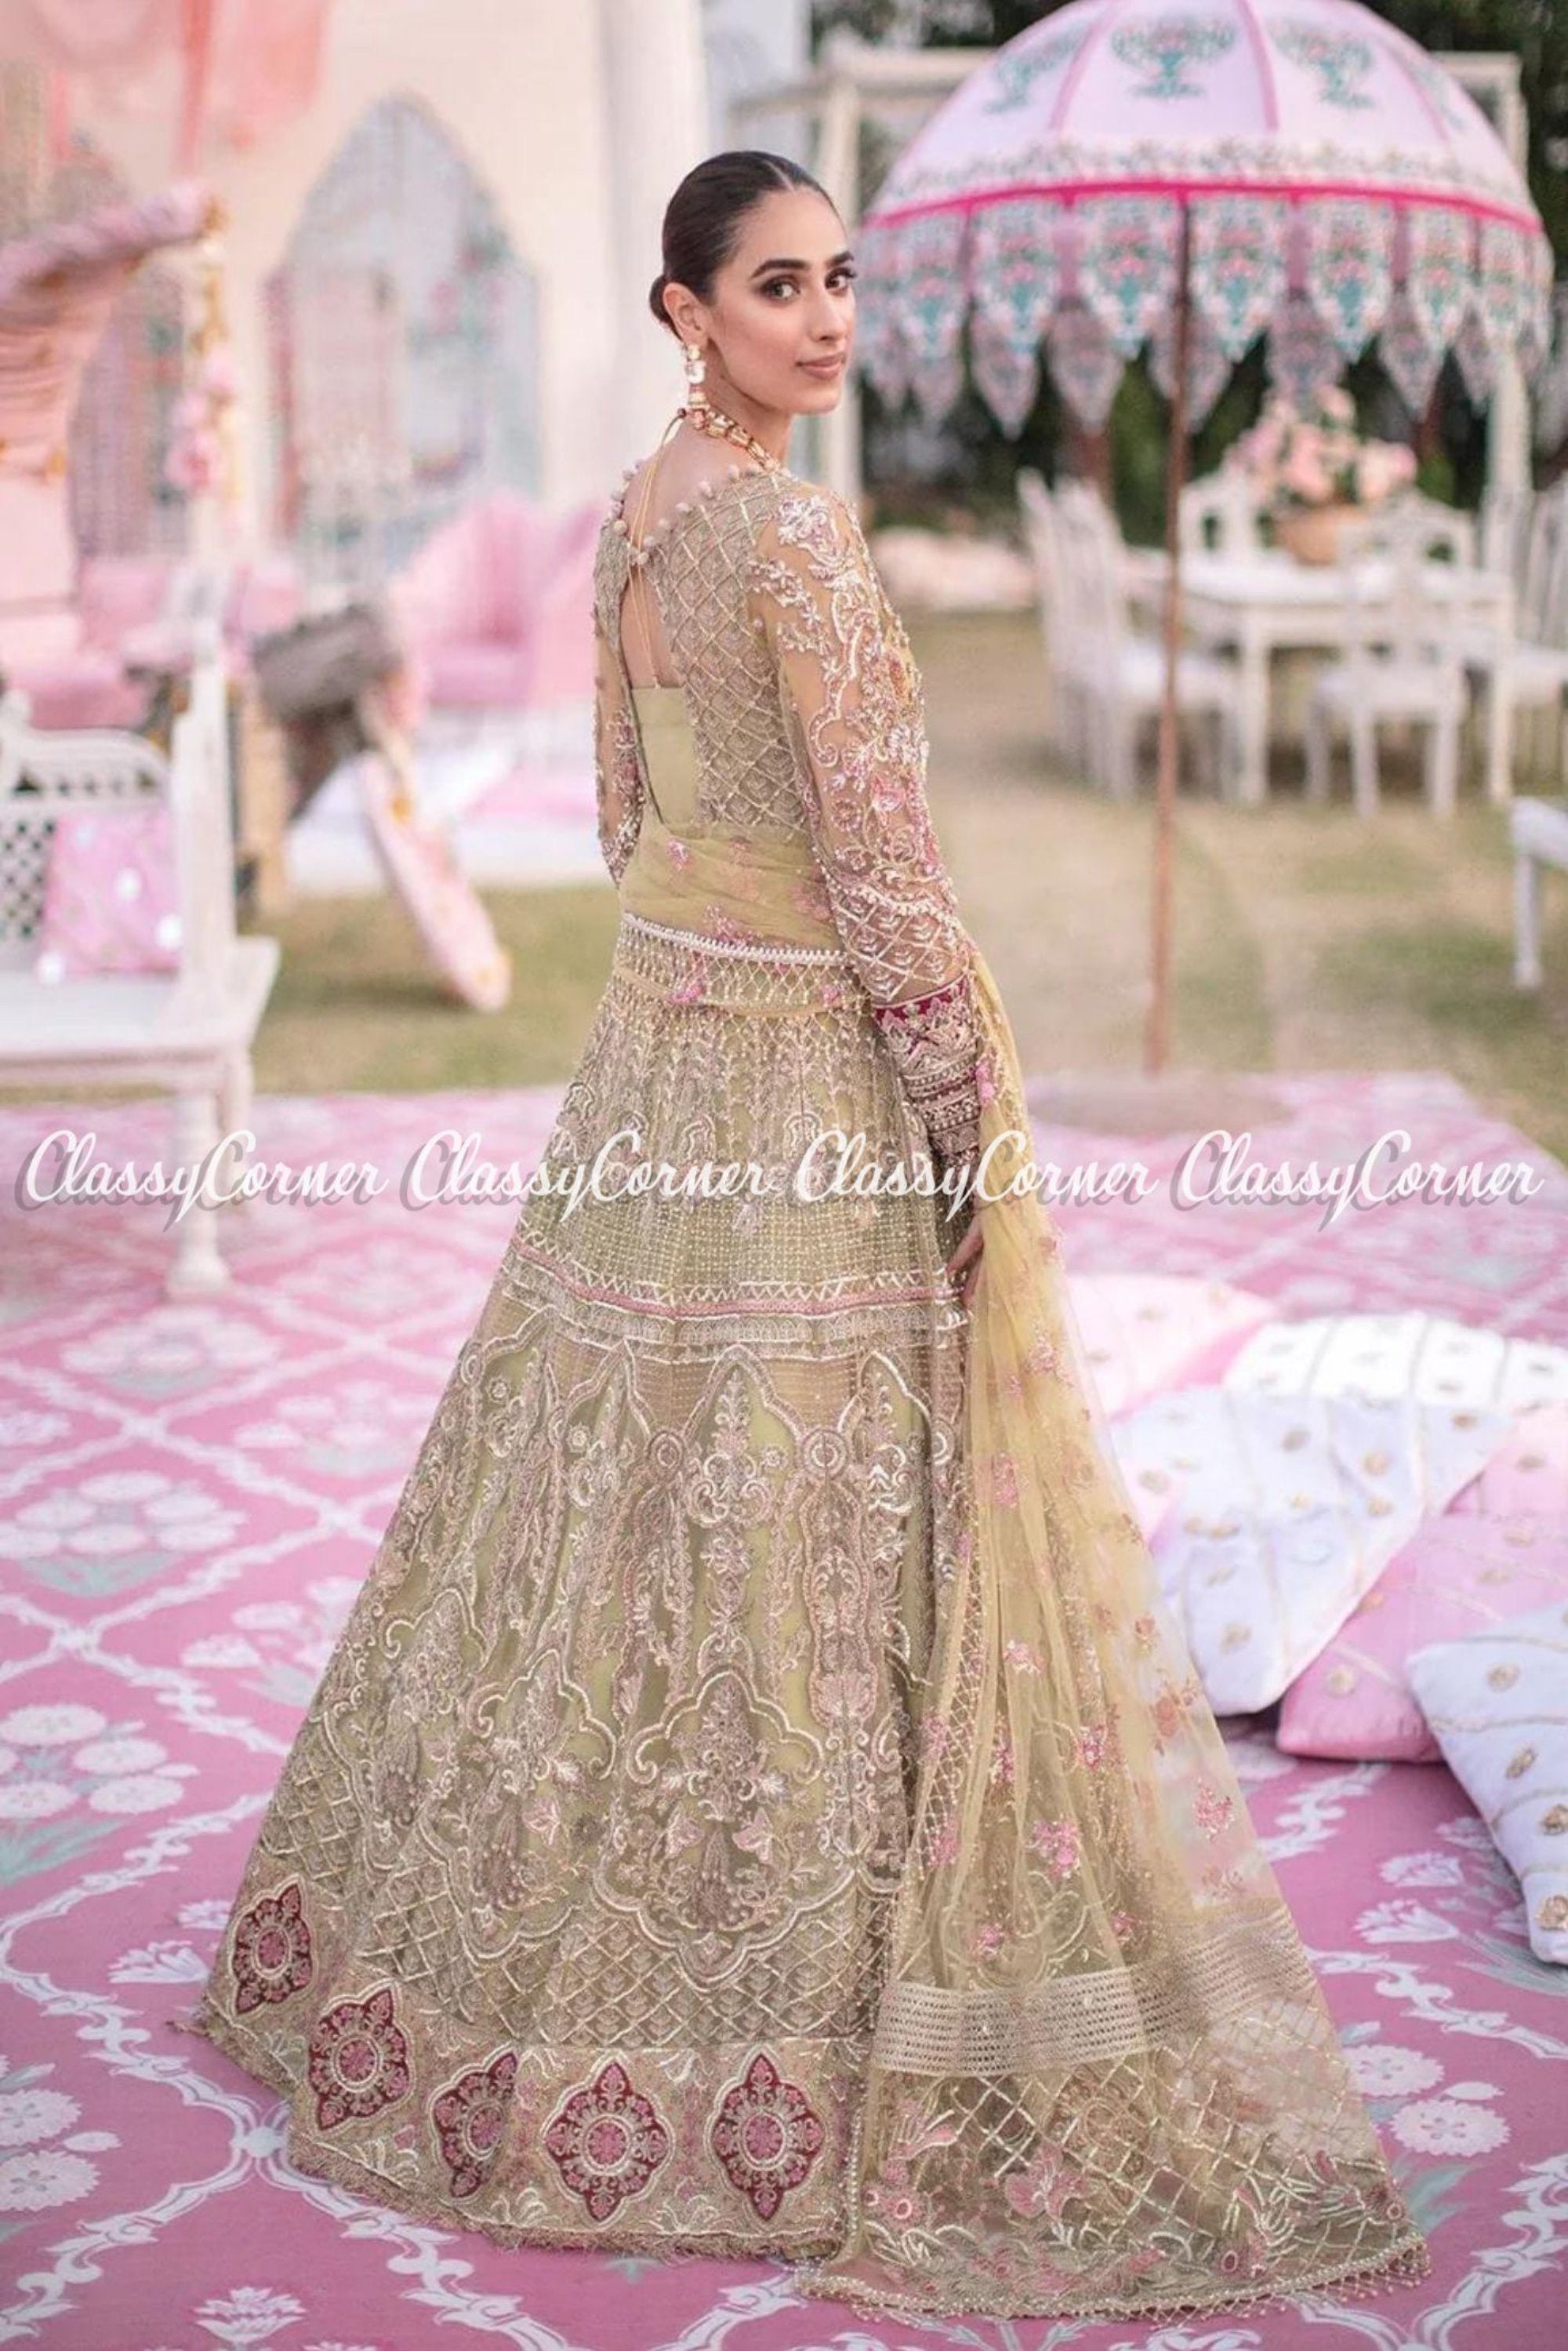 Latest Bridal Walima Dresses In Pakistan For 2023-24 | Bridal dress fashion,  Indian bridal dress, Latest bridal dresses